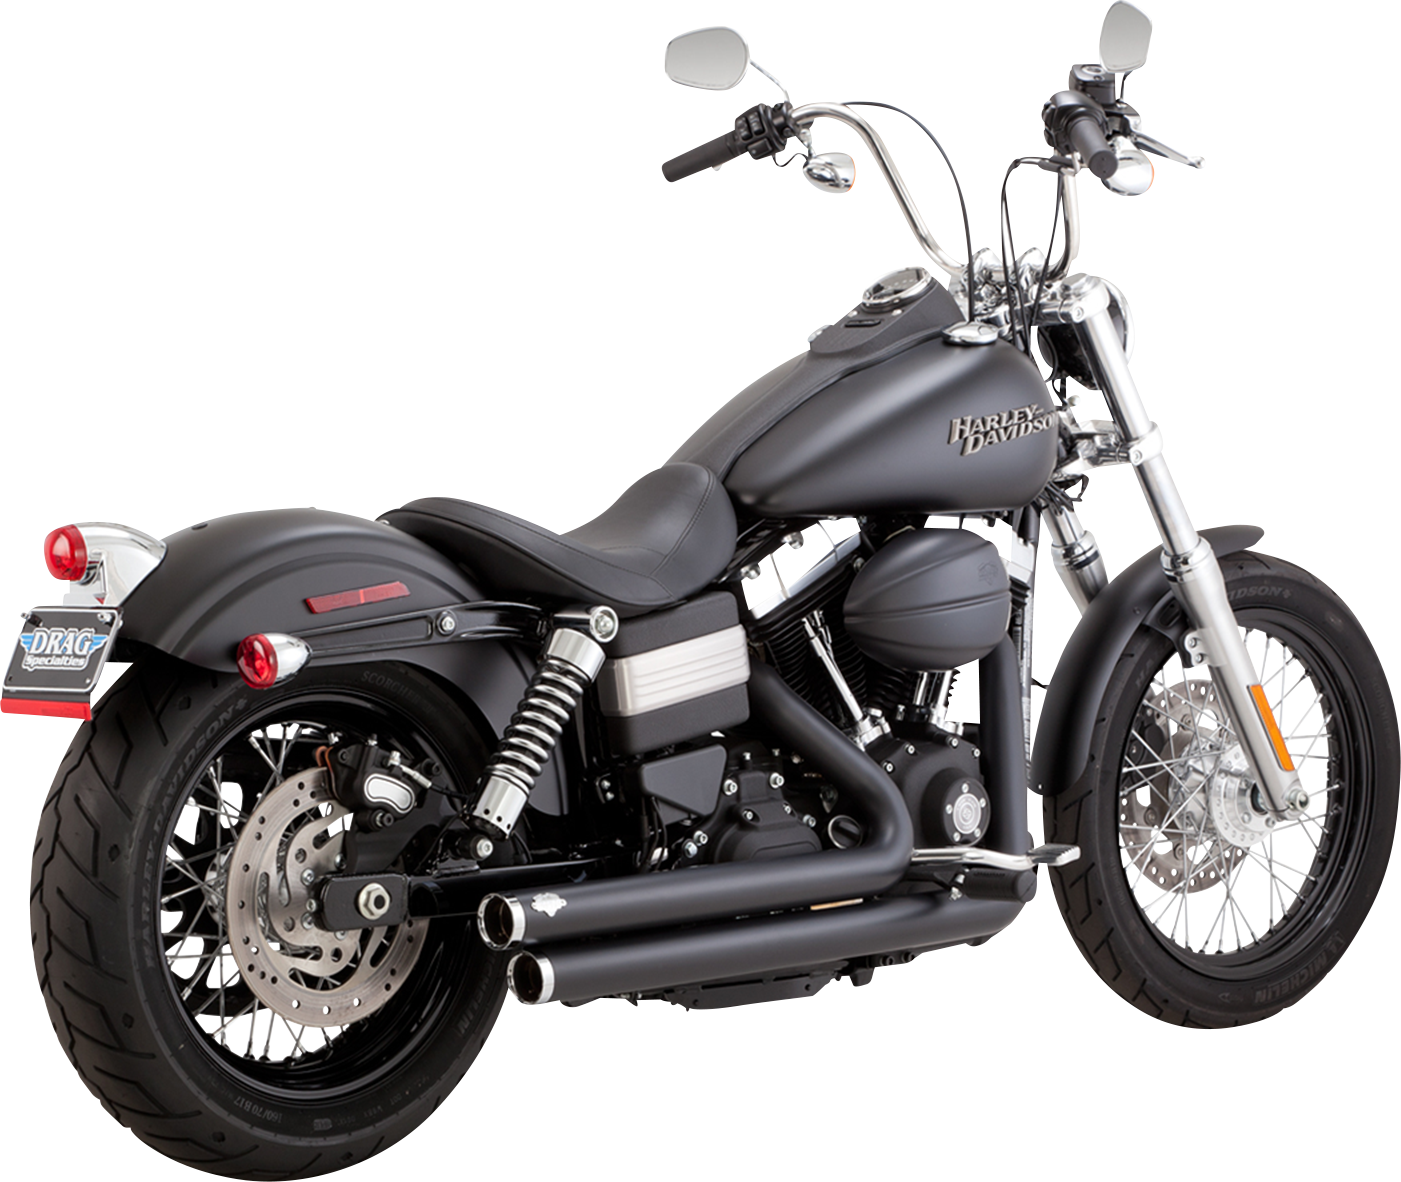 Vance & Hines Big Shots Staggered Exhaust System 2006-2017 Harley Dyna FXD